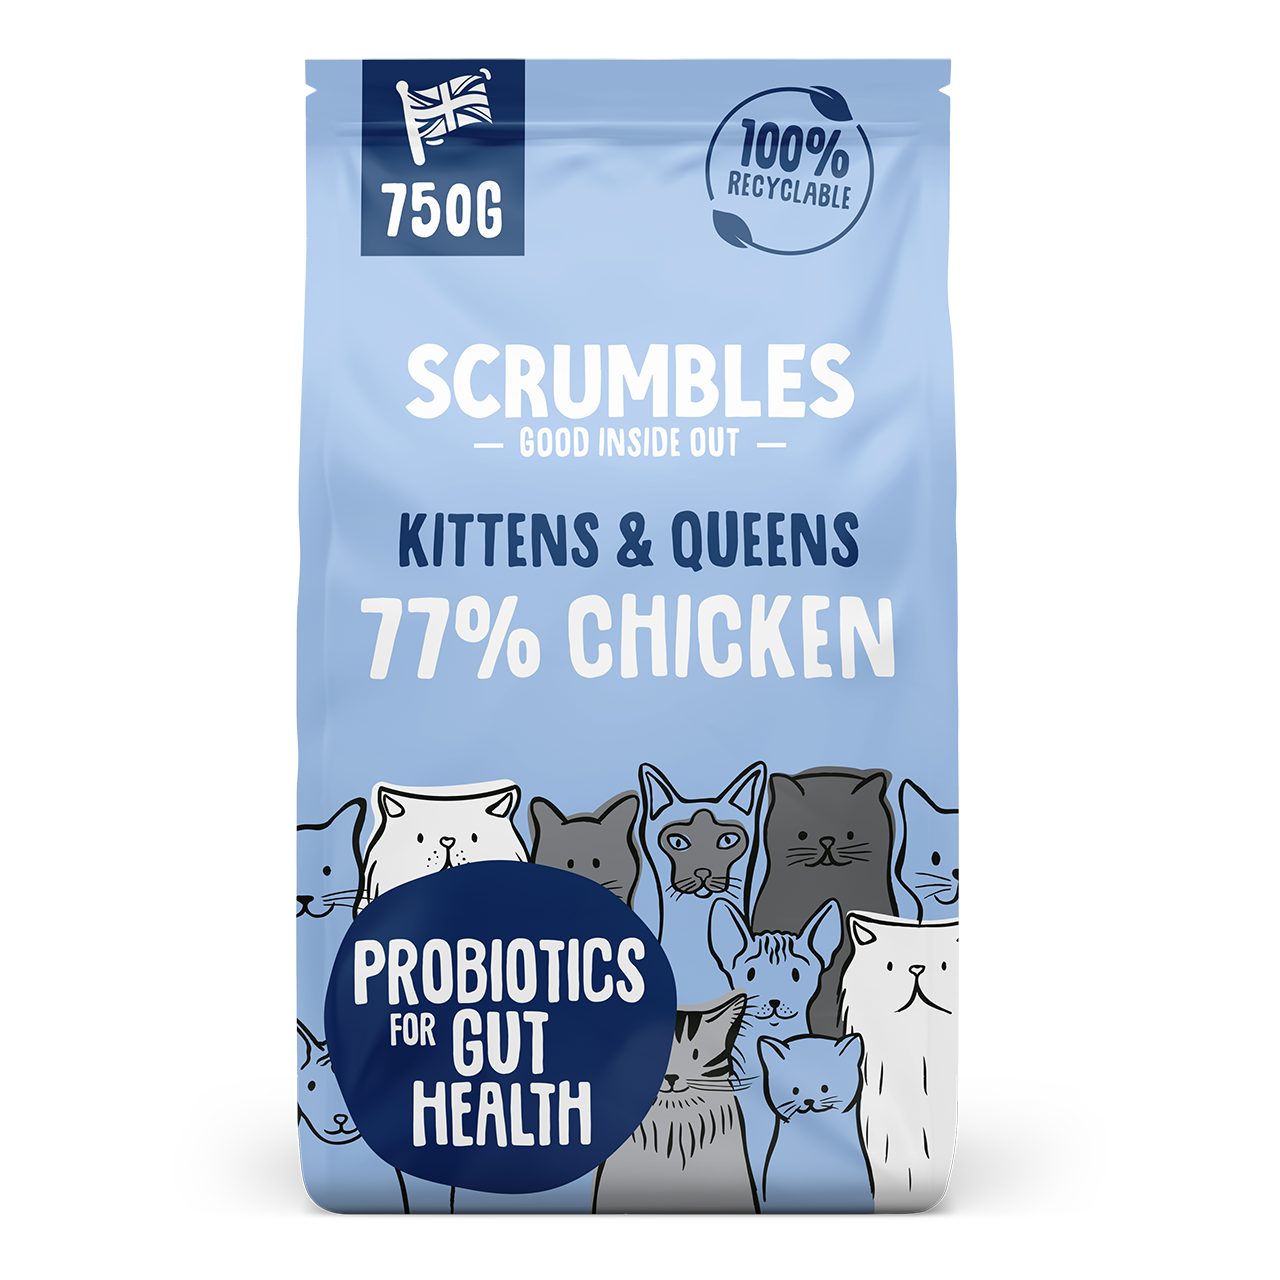 chicken-dry-kitten-food-scrumbles-dry-cat-food-black-friday-cat-food-dry-cat-food-gluten-free-cat-food-high-protein-cat-food-hypoallergenic-cat-food-kitten-food-natural-cat-food-sensitive-stomach-cat-food-0